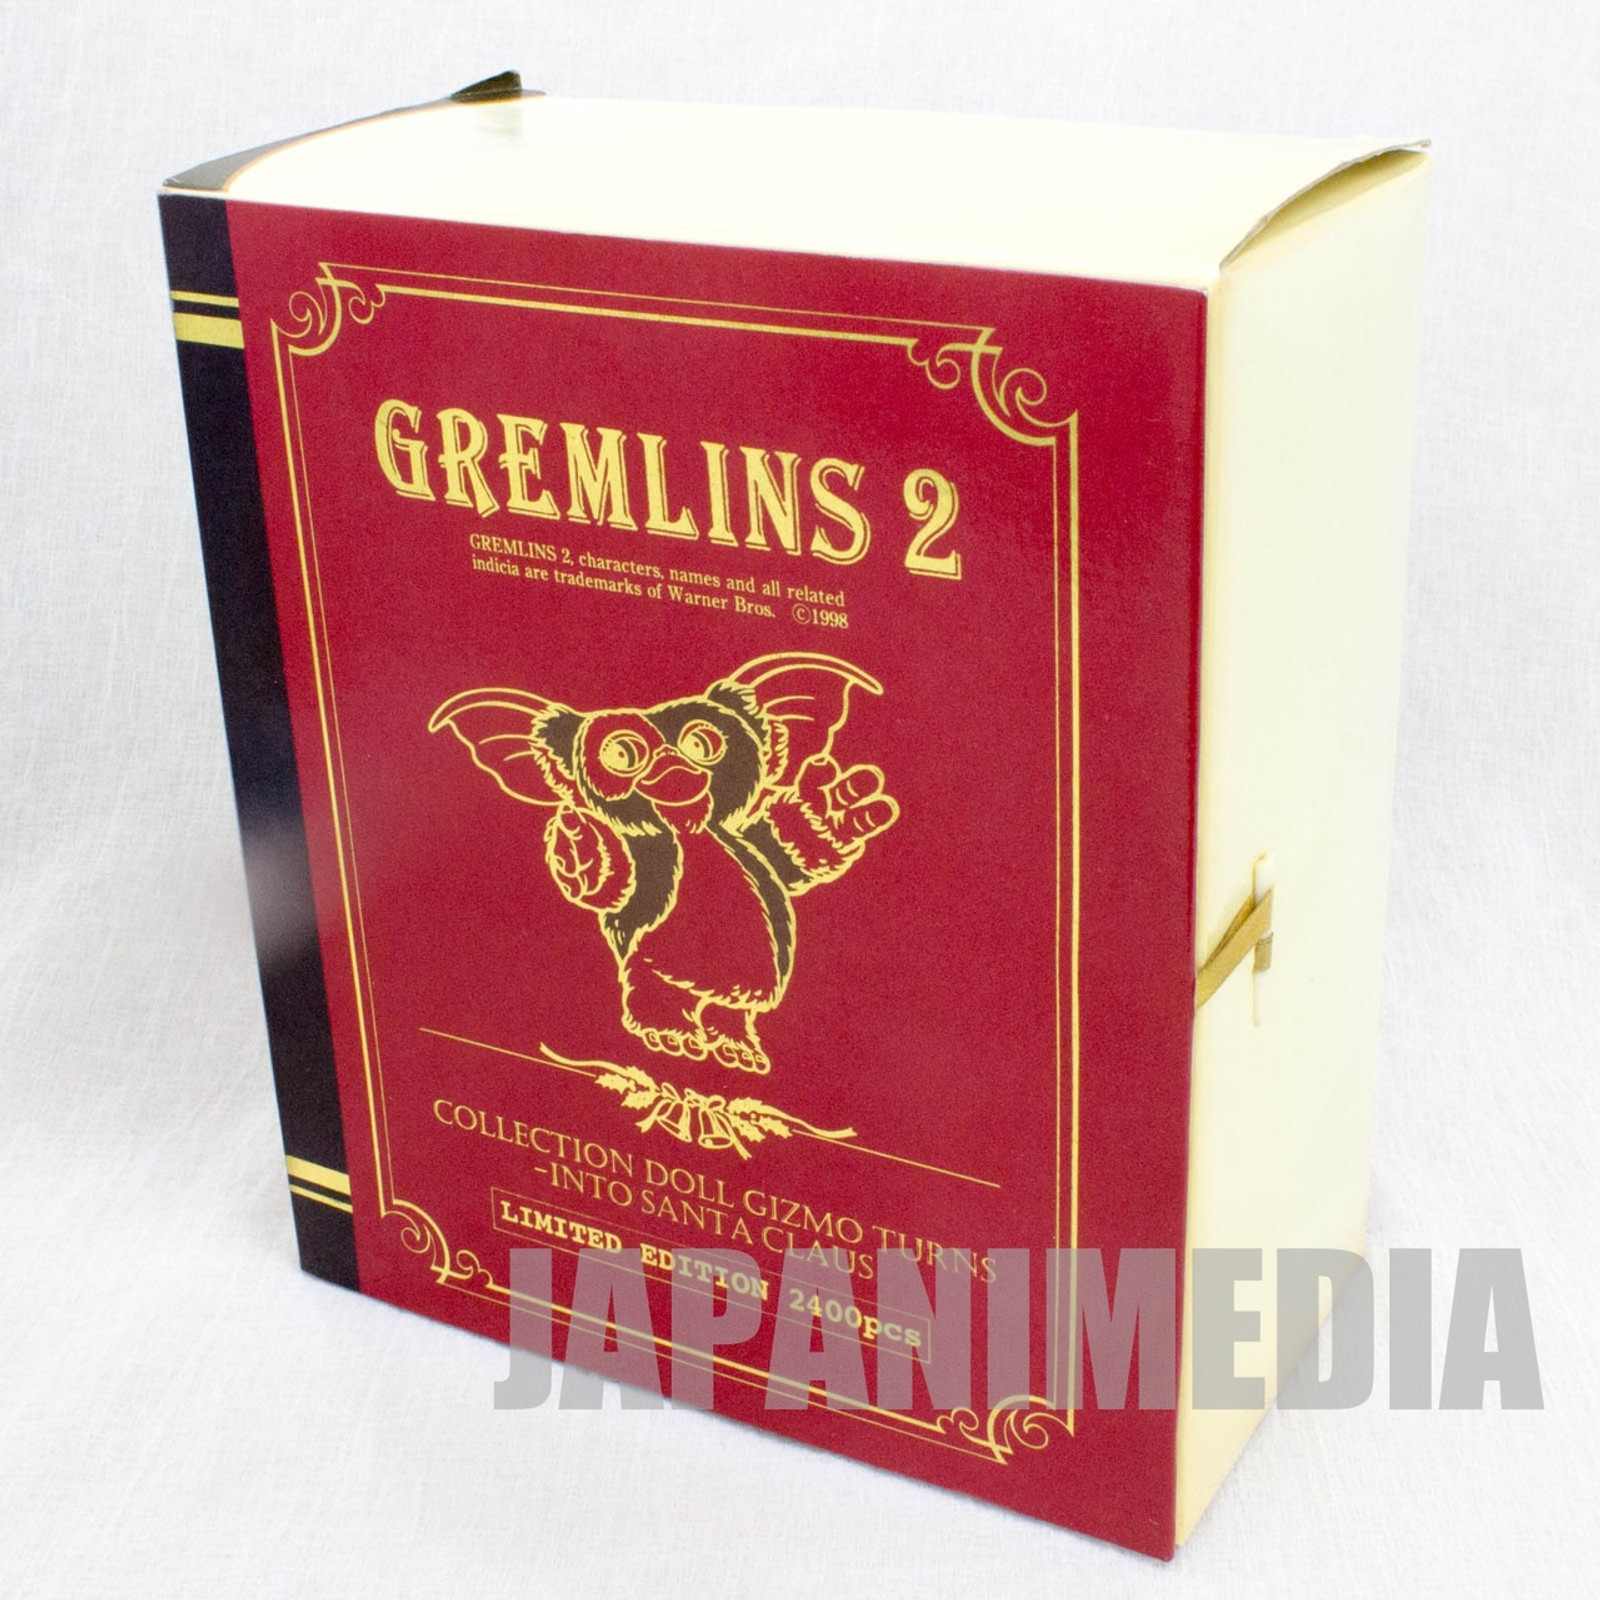 Gremlins 2 Jun Planning Collection Doll Gizmo Santa-Claus 1998 ver limited  2400 - Japanimedia Store